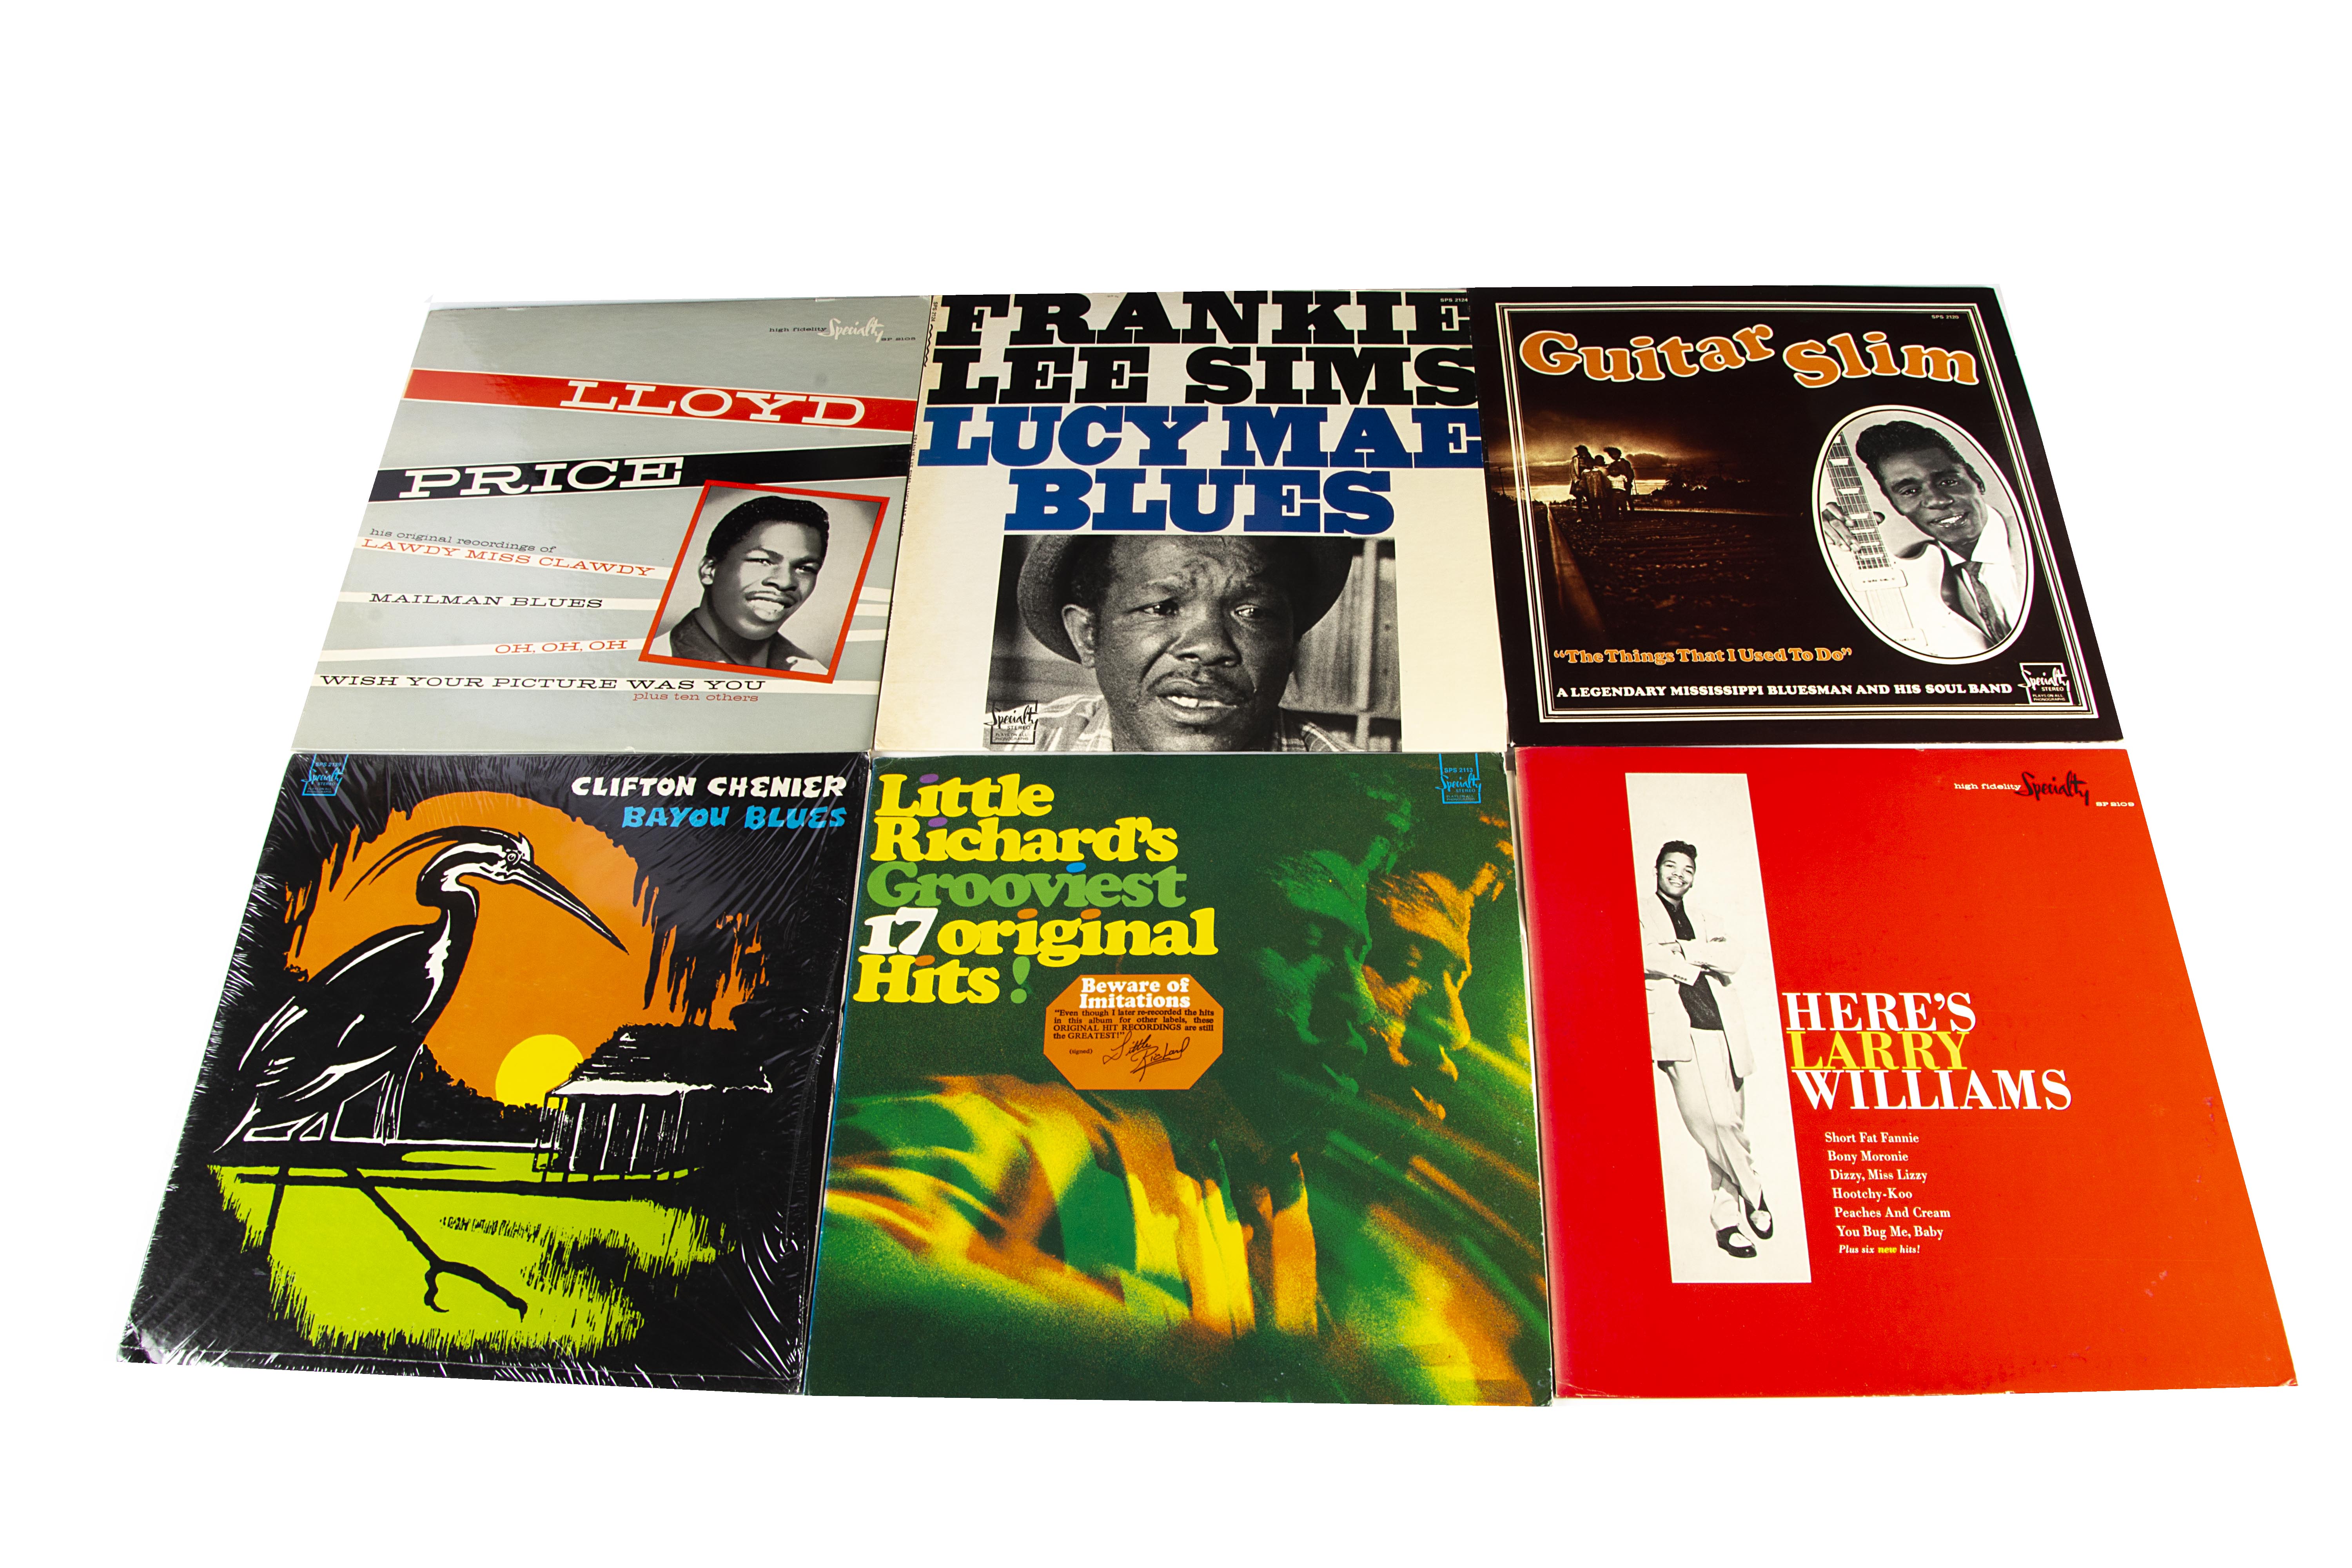 Speciality Label LPs, fifteen albums of mainly Blues, Soul and Rock N Roll, all on the USA